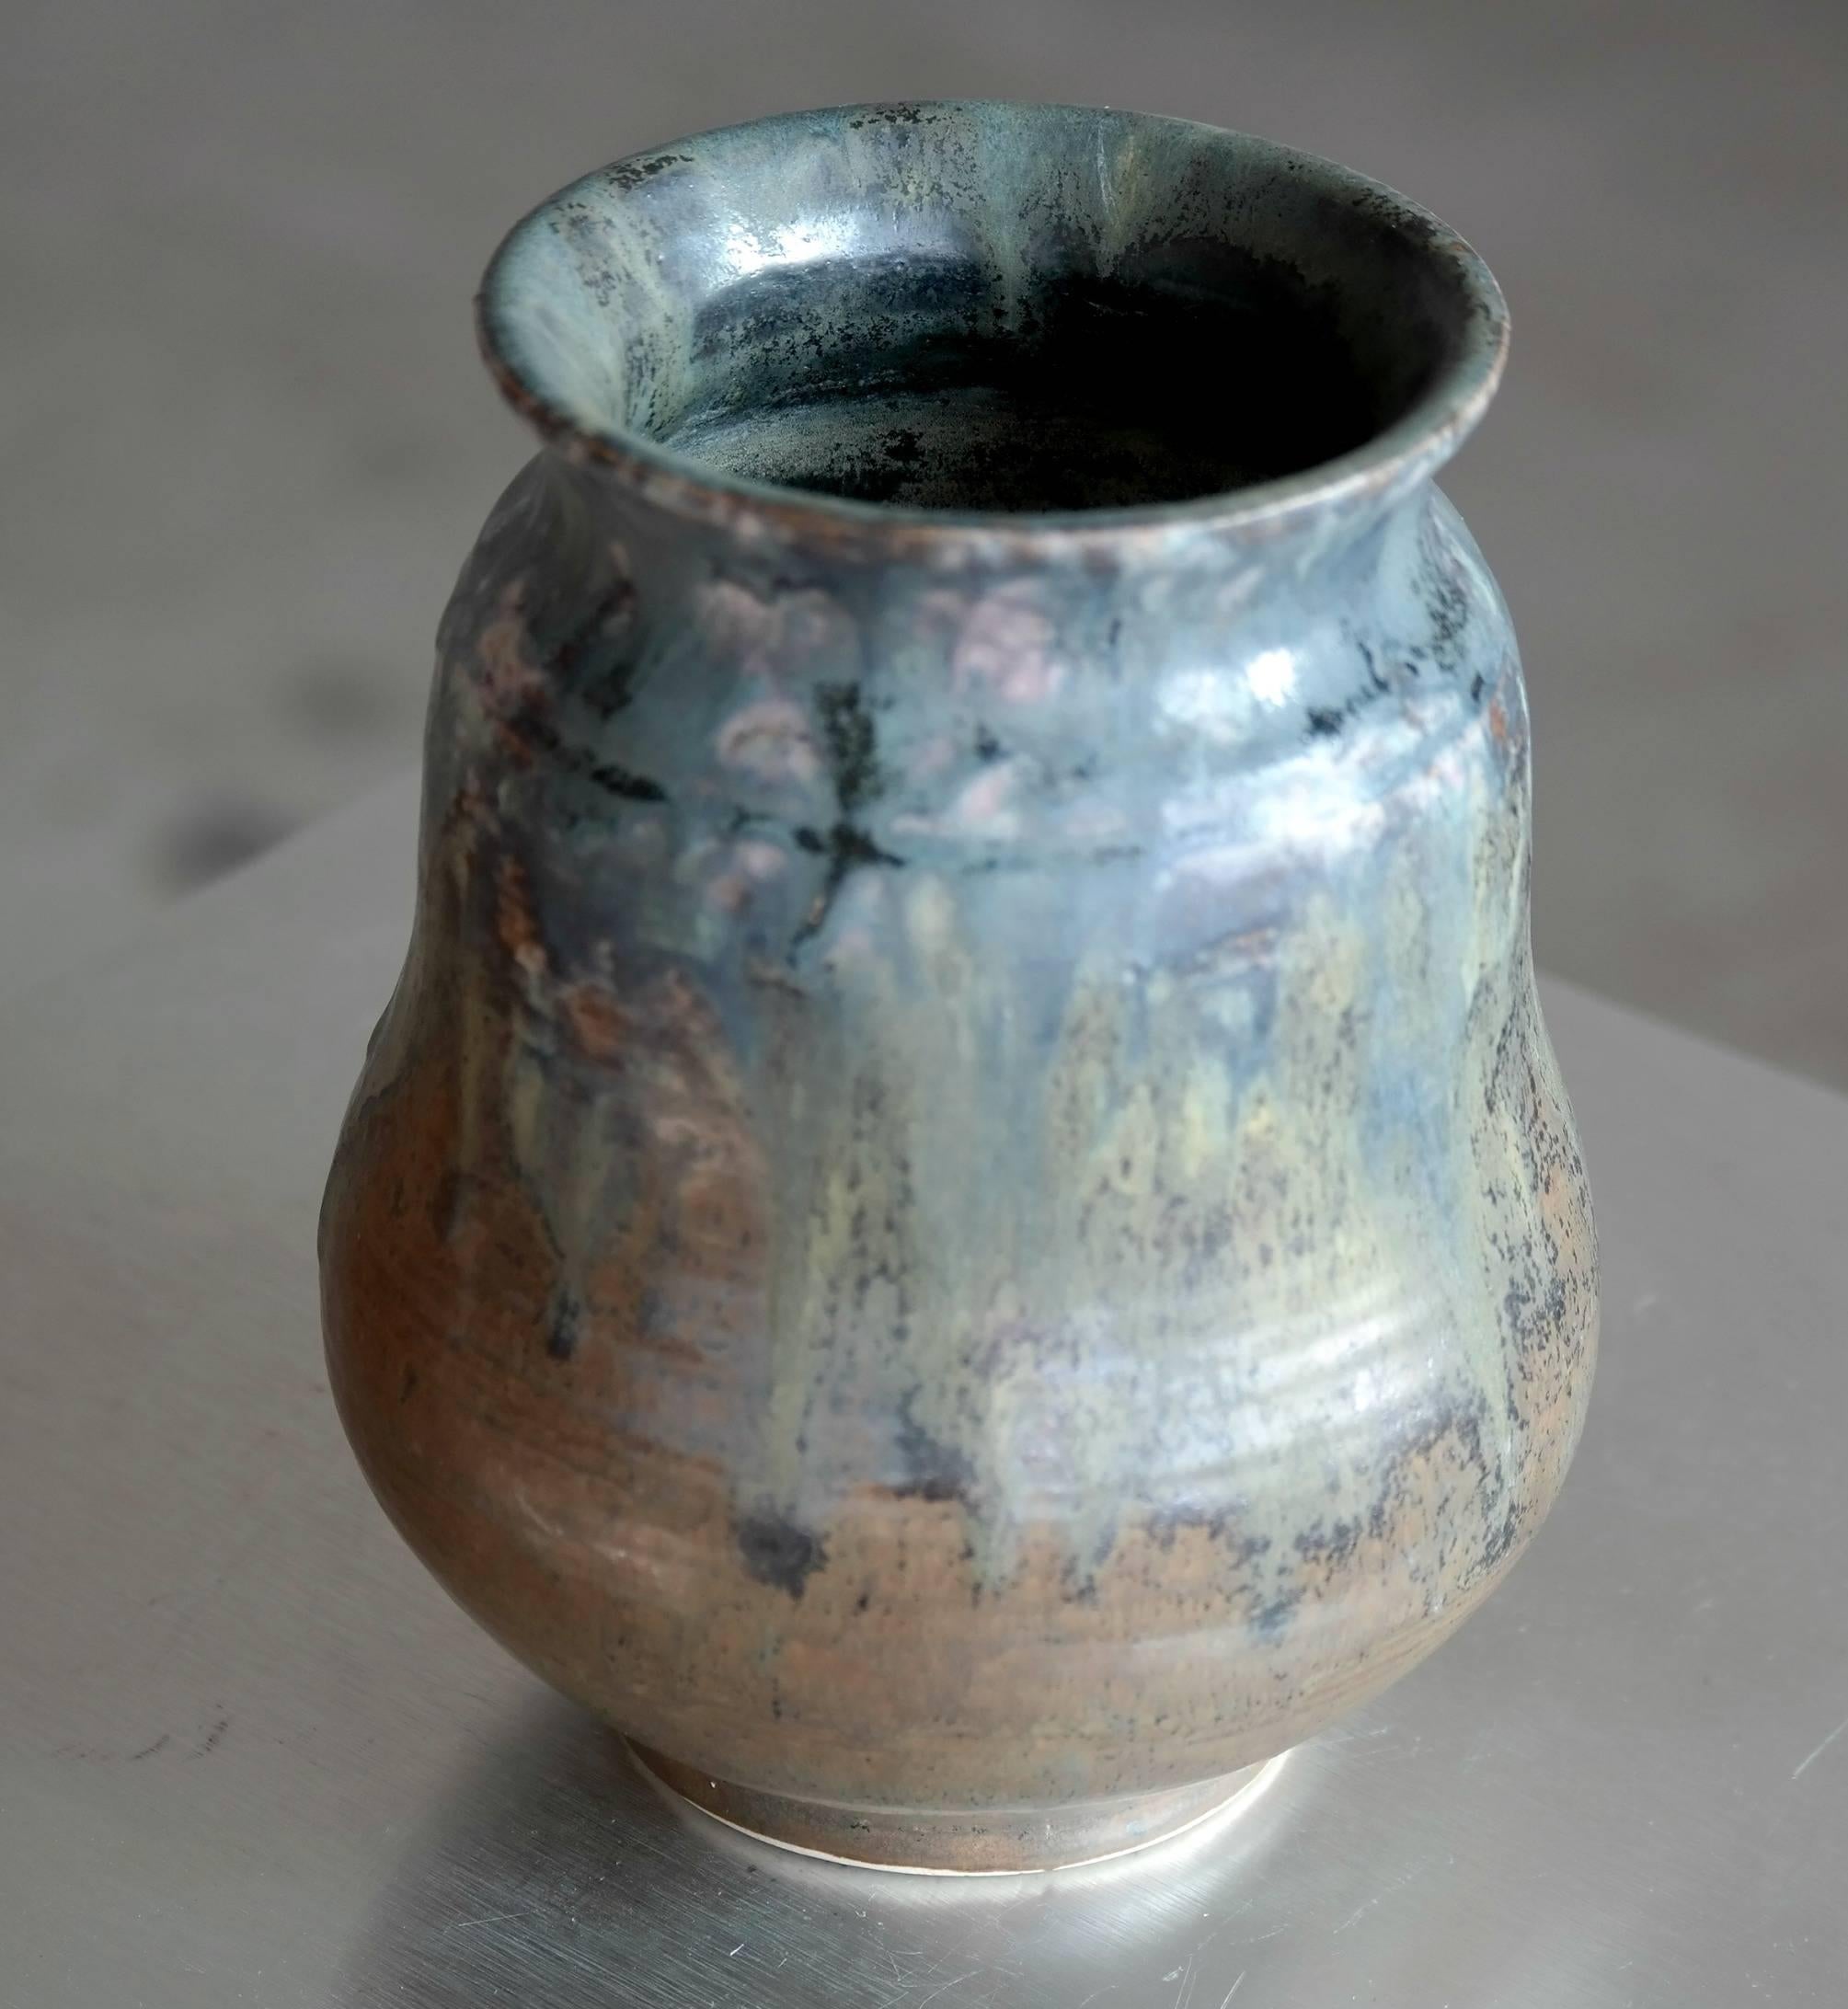 Unique stoneware vase with streaky bluish green crystalline glaze with traces of pink by Carl Halier. Halier shared studio with Arne Bang and Axel Salto in the late 1920s when this vase was made.

